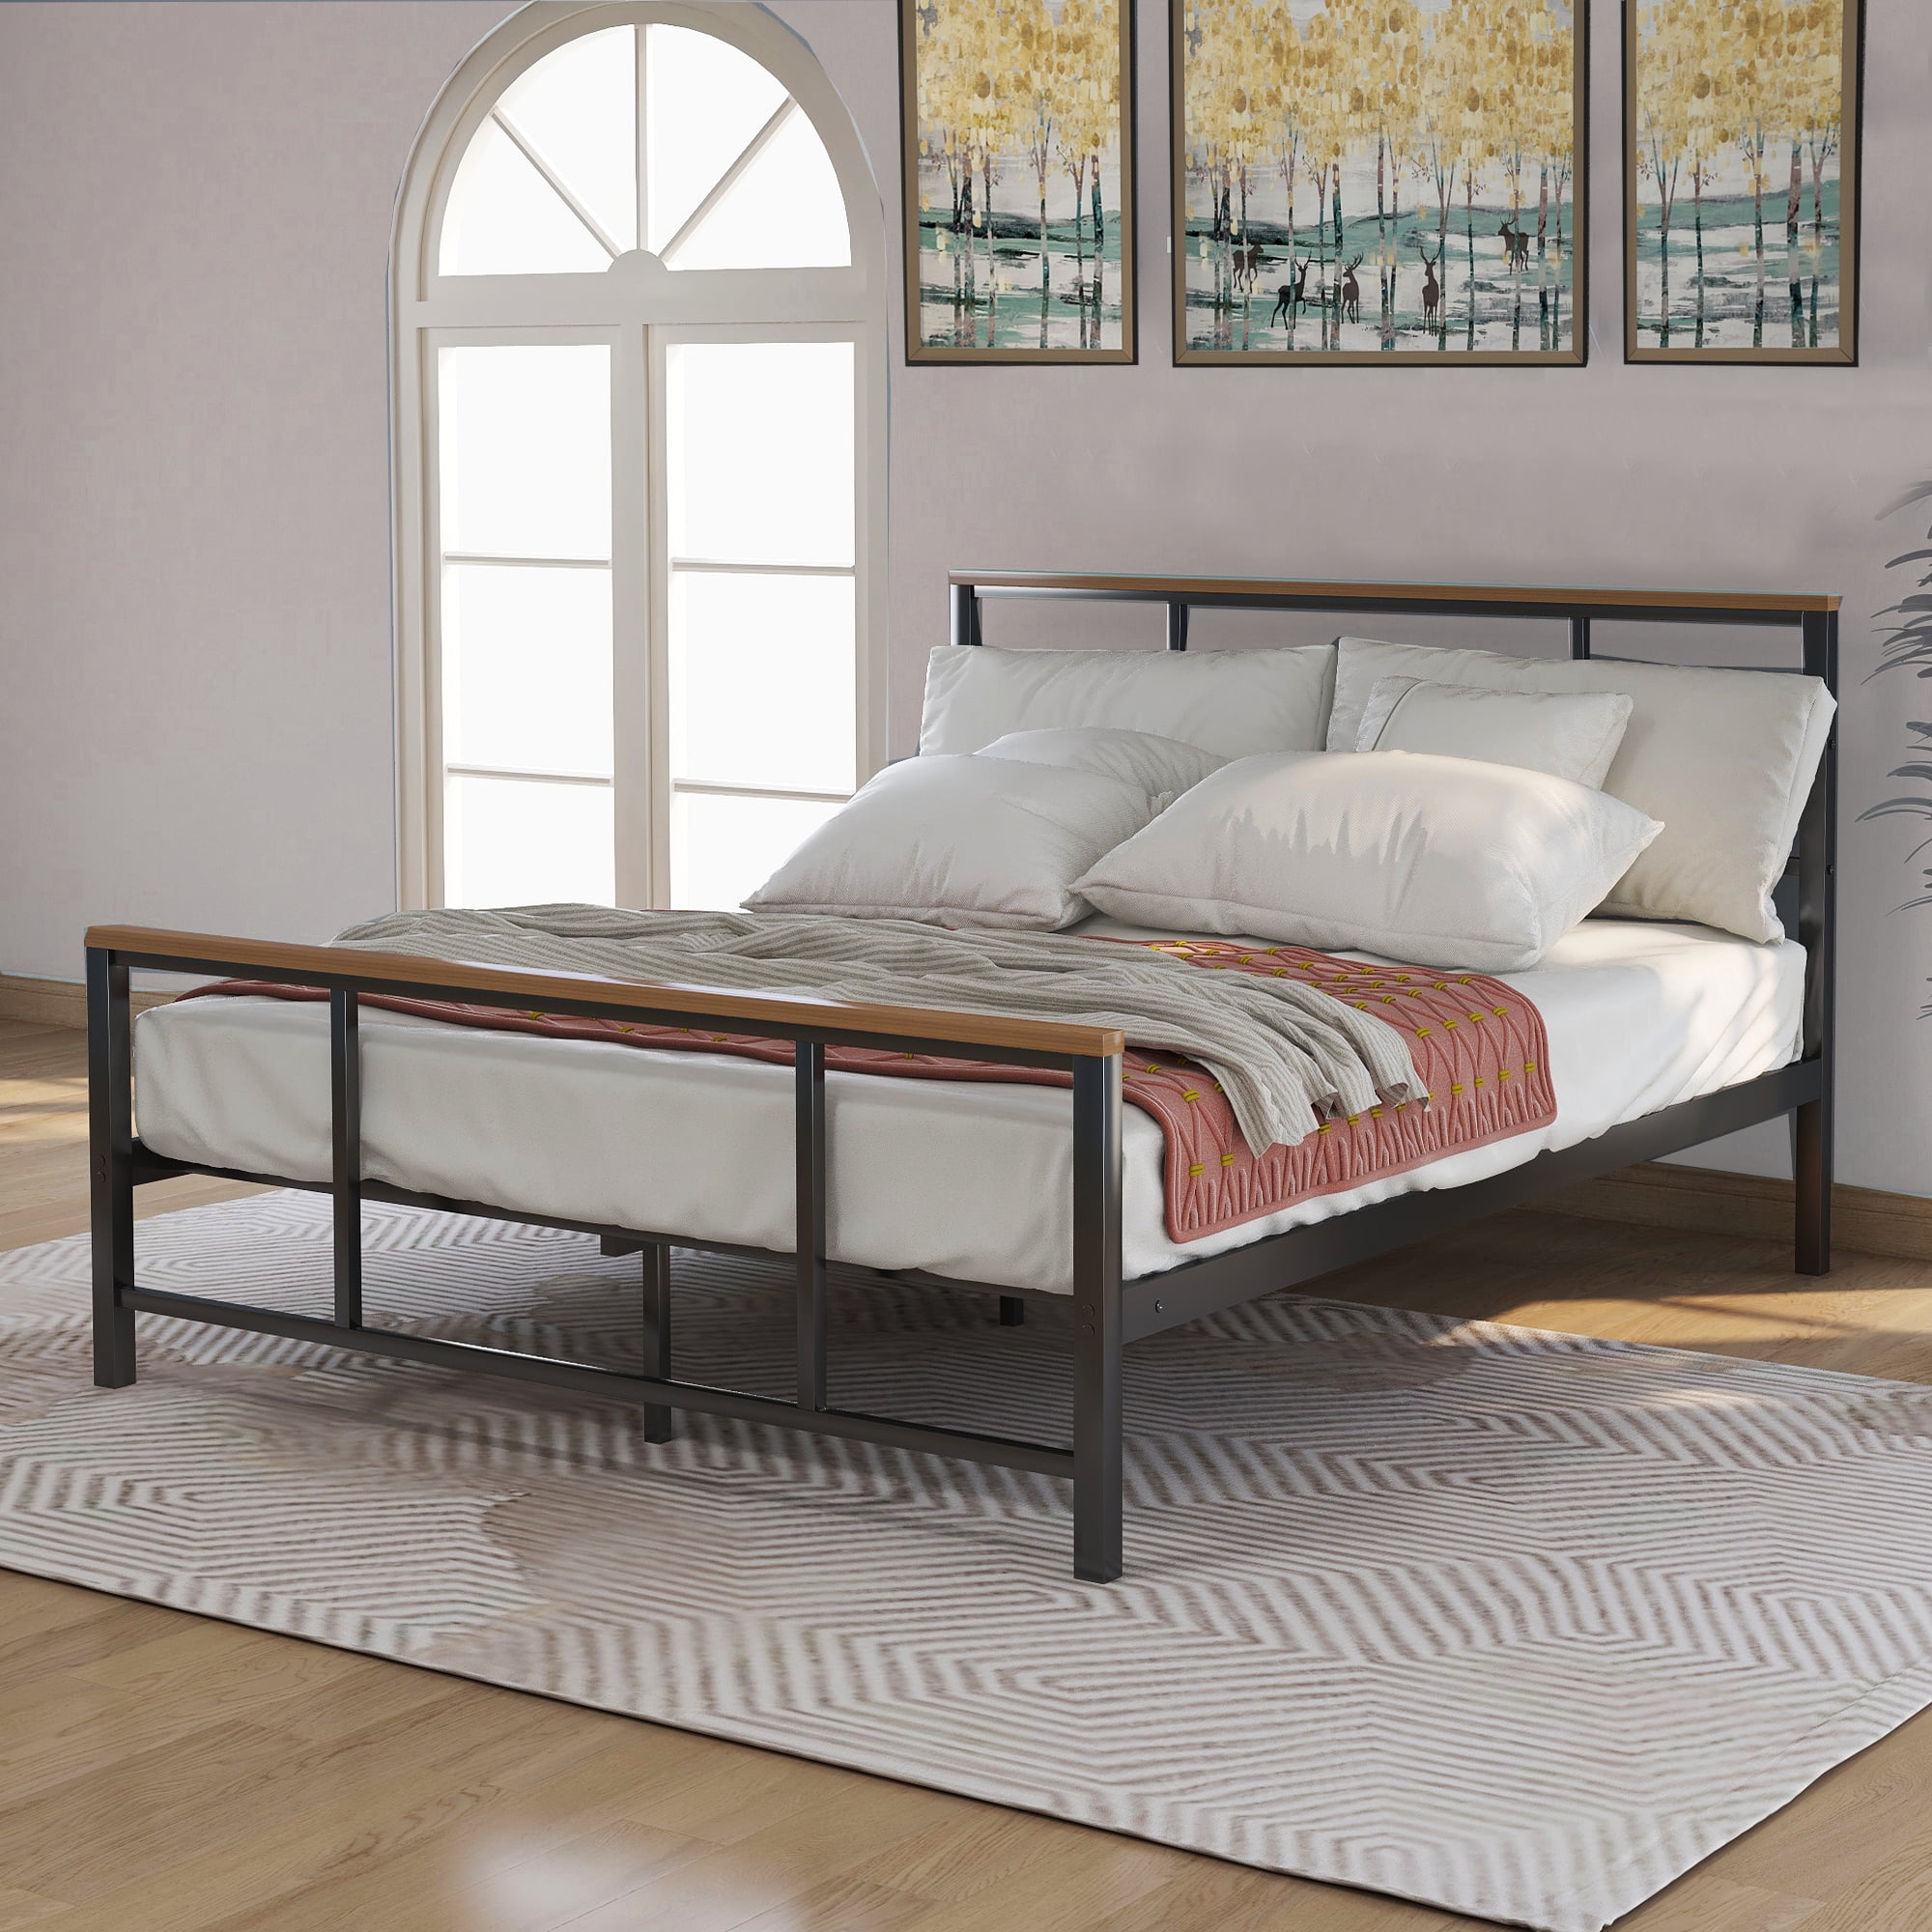 Bed Frame Bedroom Furniture, Bed Frame With Headboard No Box Spring Needed